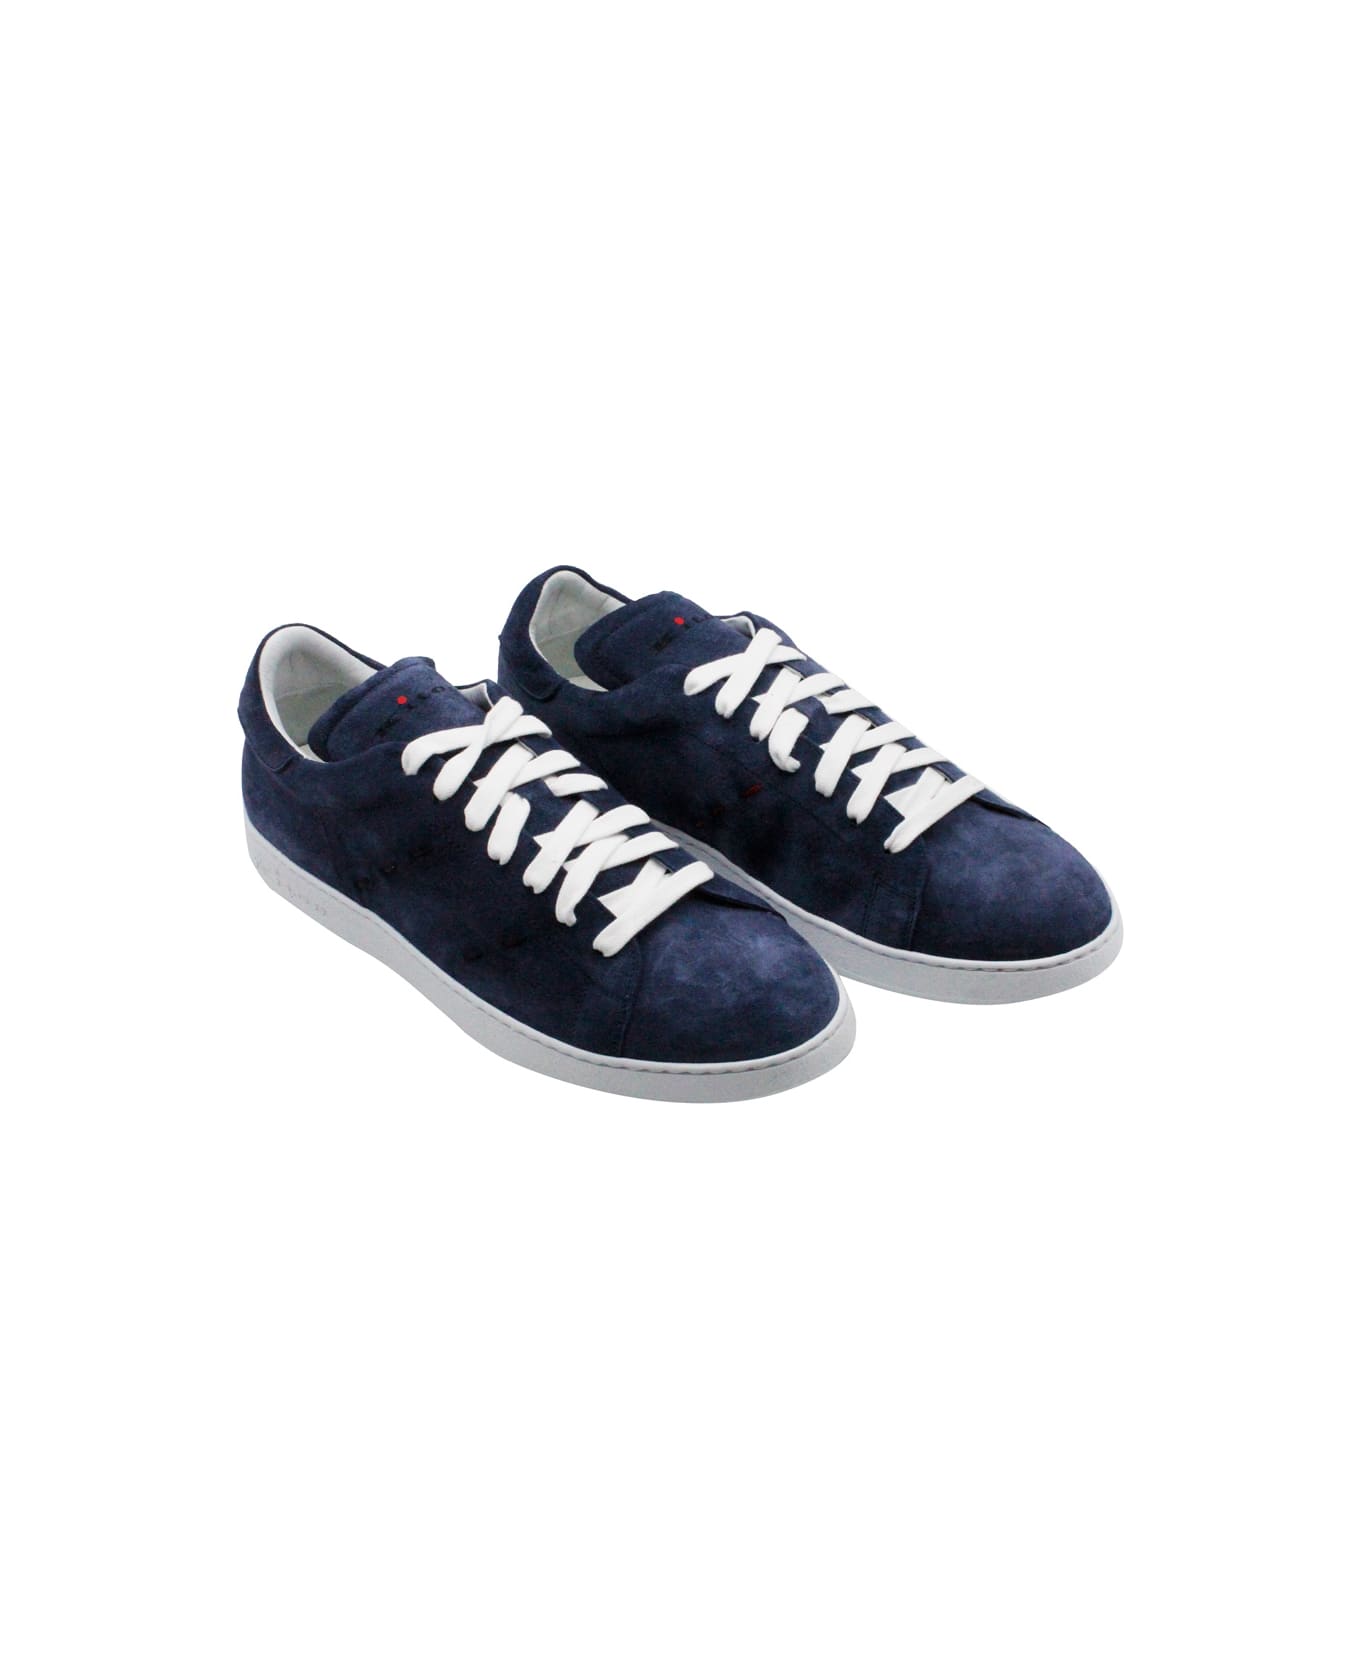 Kiton Lightweight Sneaker In Soft Suede With Contrasting Color Finishes And Stitching. Tongue With Logo Print And Lace Closure. - Blu